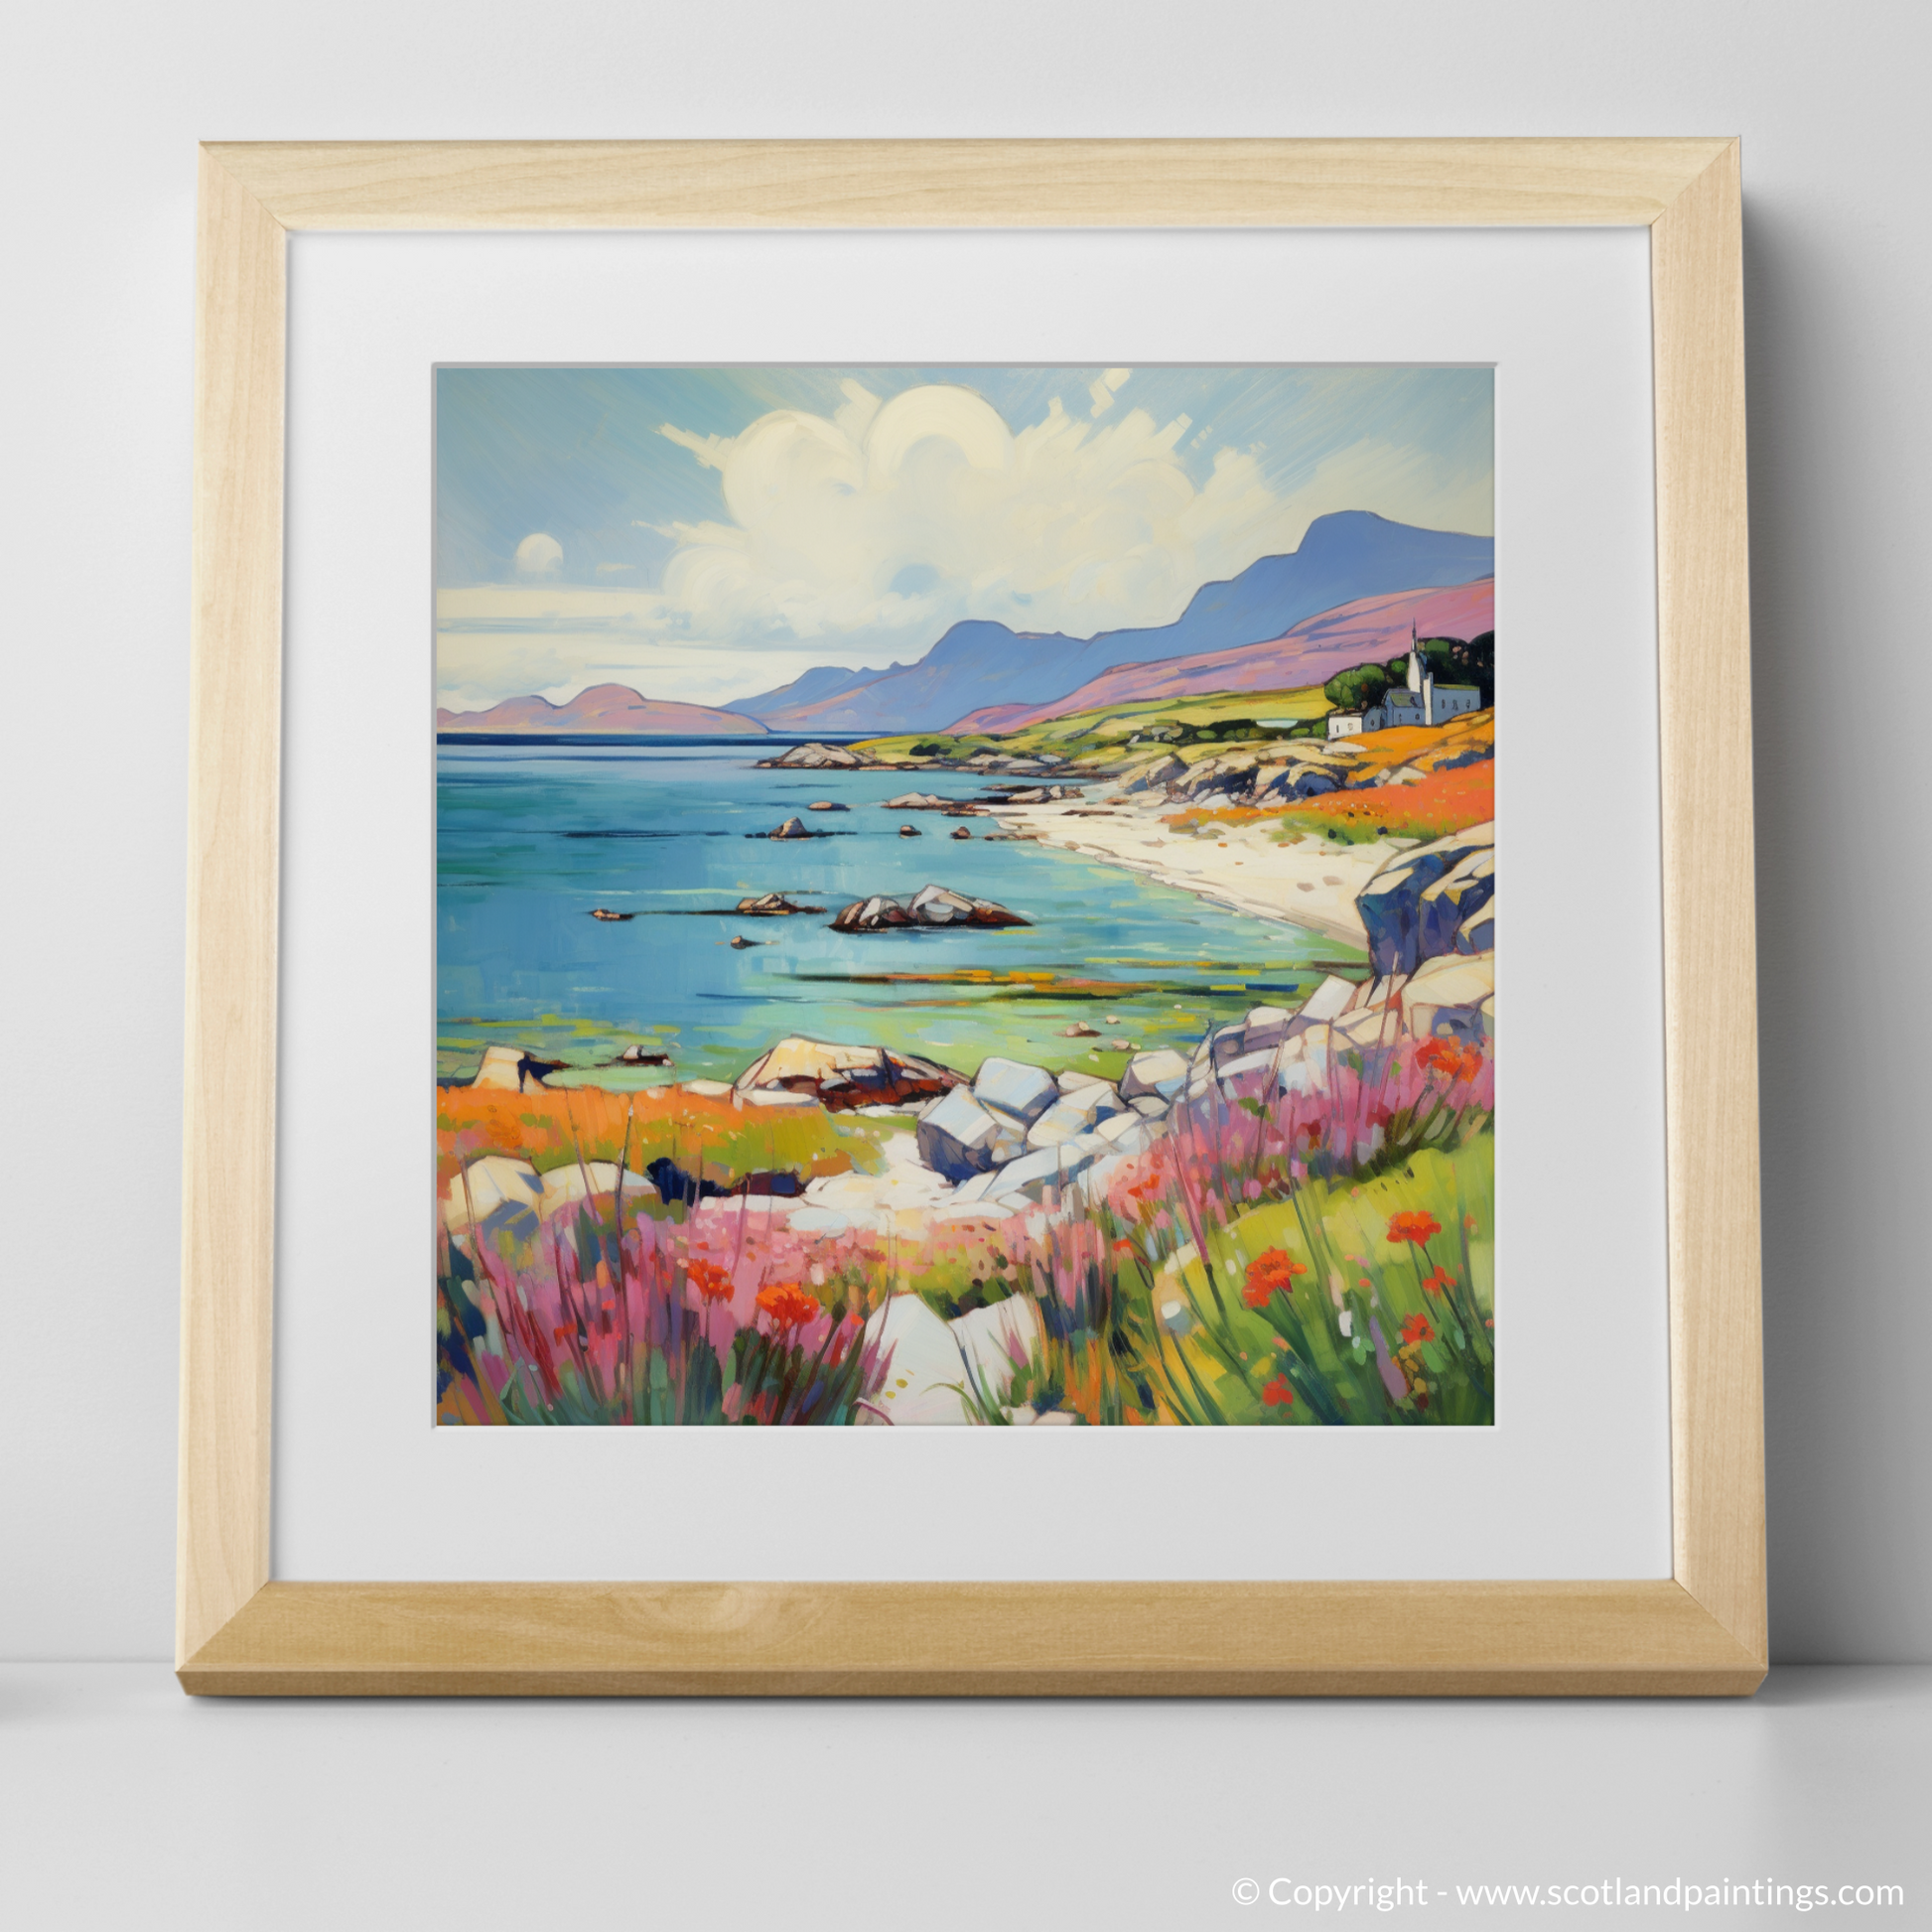 Art Print of Isle of Mull, Inner Hebrides in summer with a natural frame